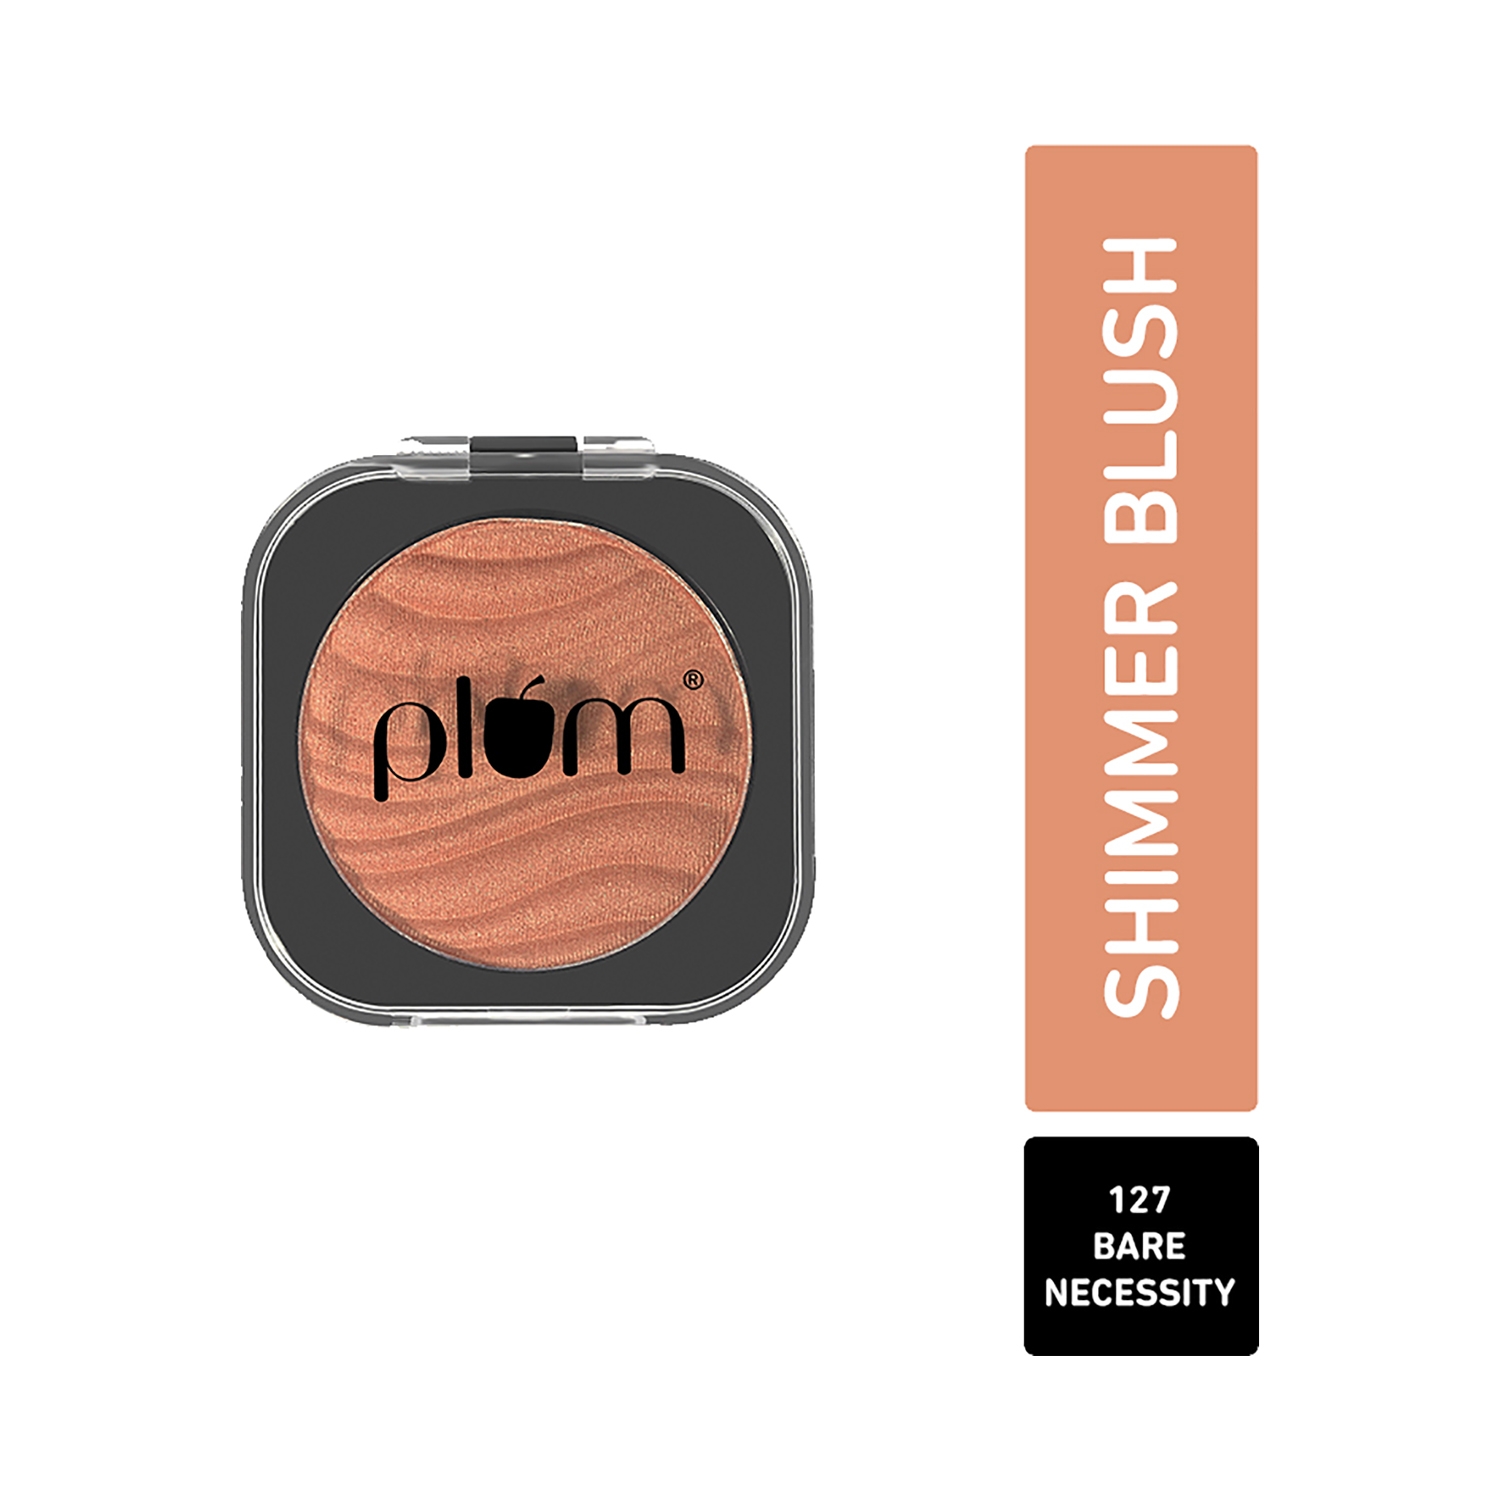 Plum | Plum Cheek-A-Boo Shimmer Blush with Highly Pigmented - 127 Bare Necessity (4.5g)